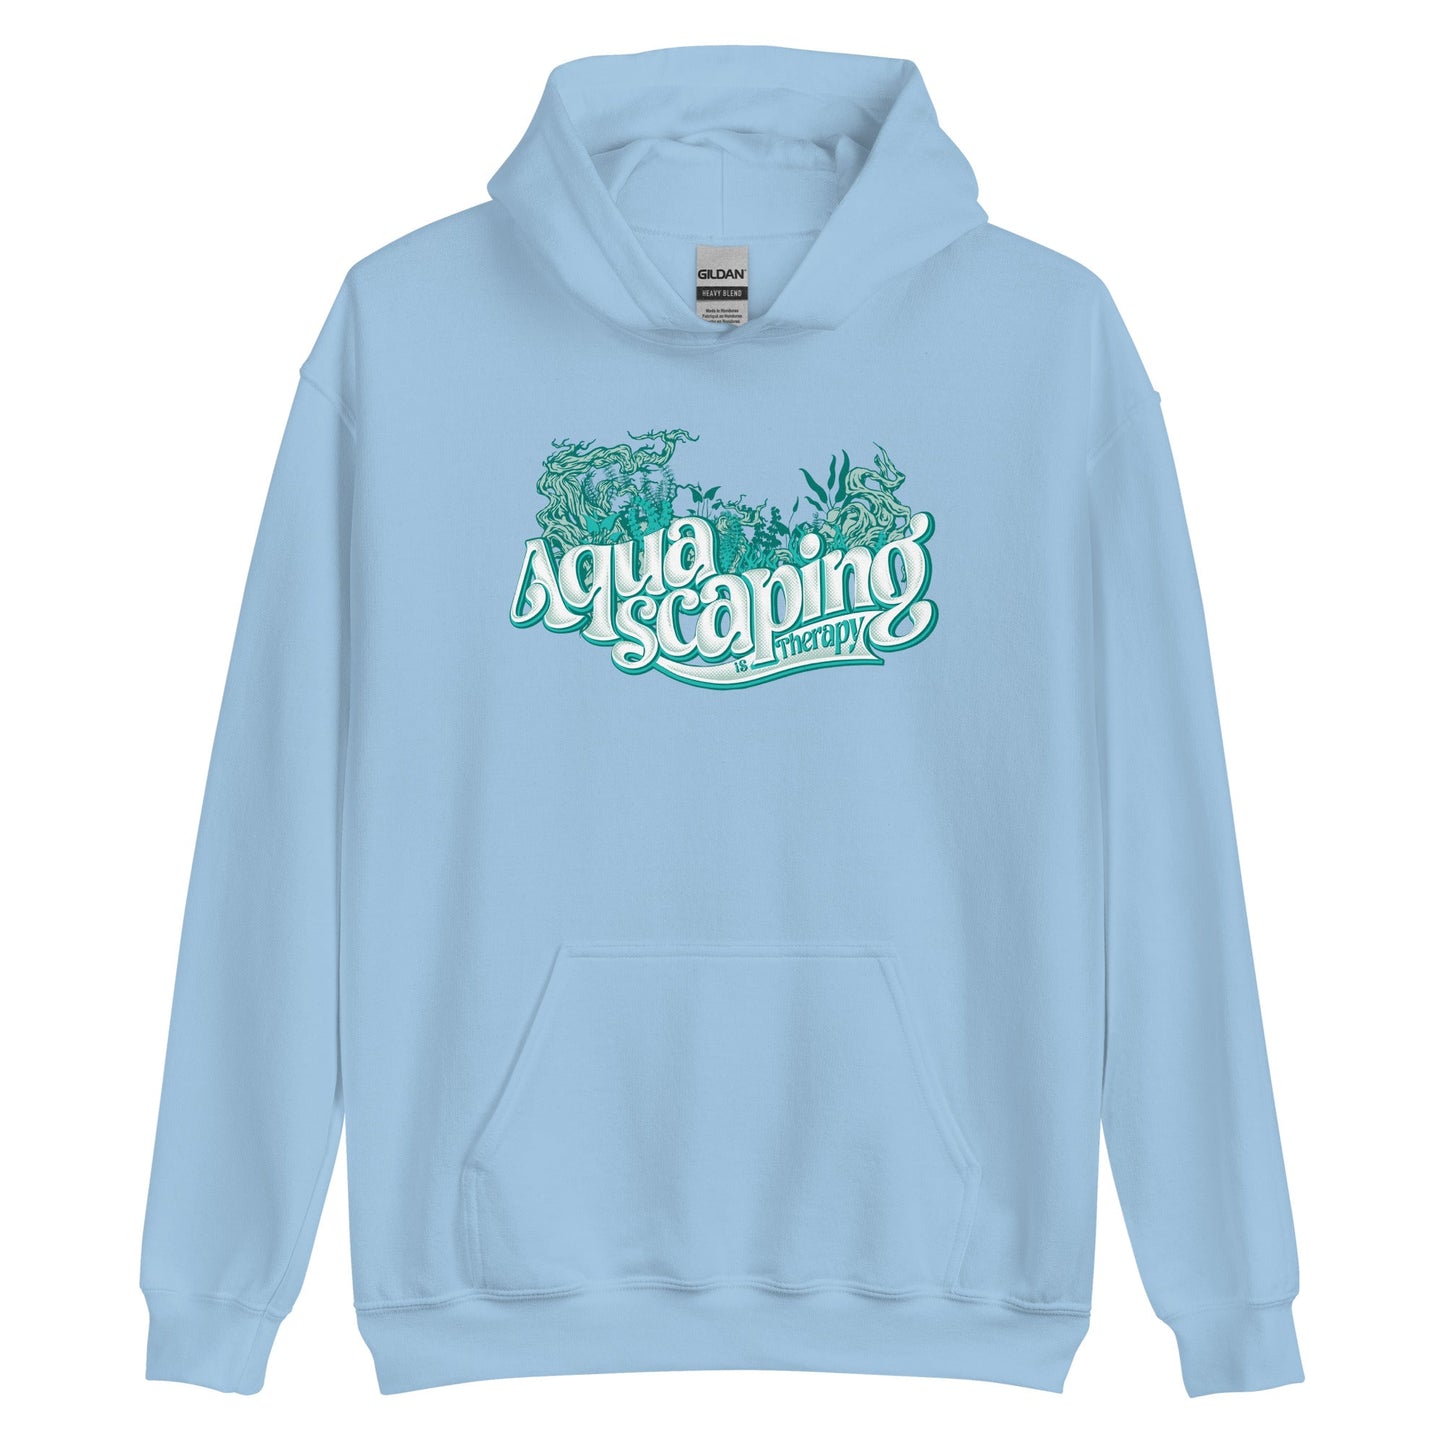 Aquascaping is Therapy - Hoodie